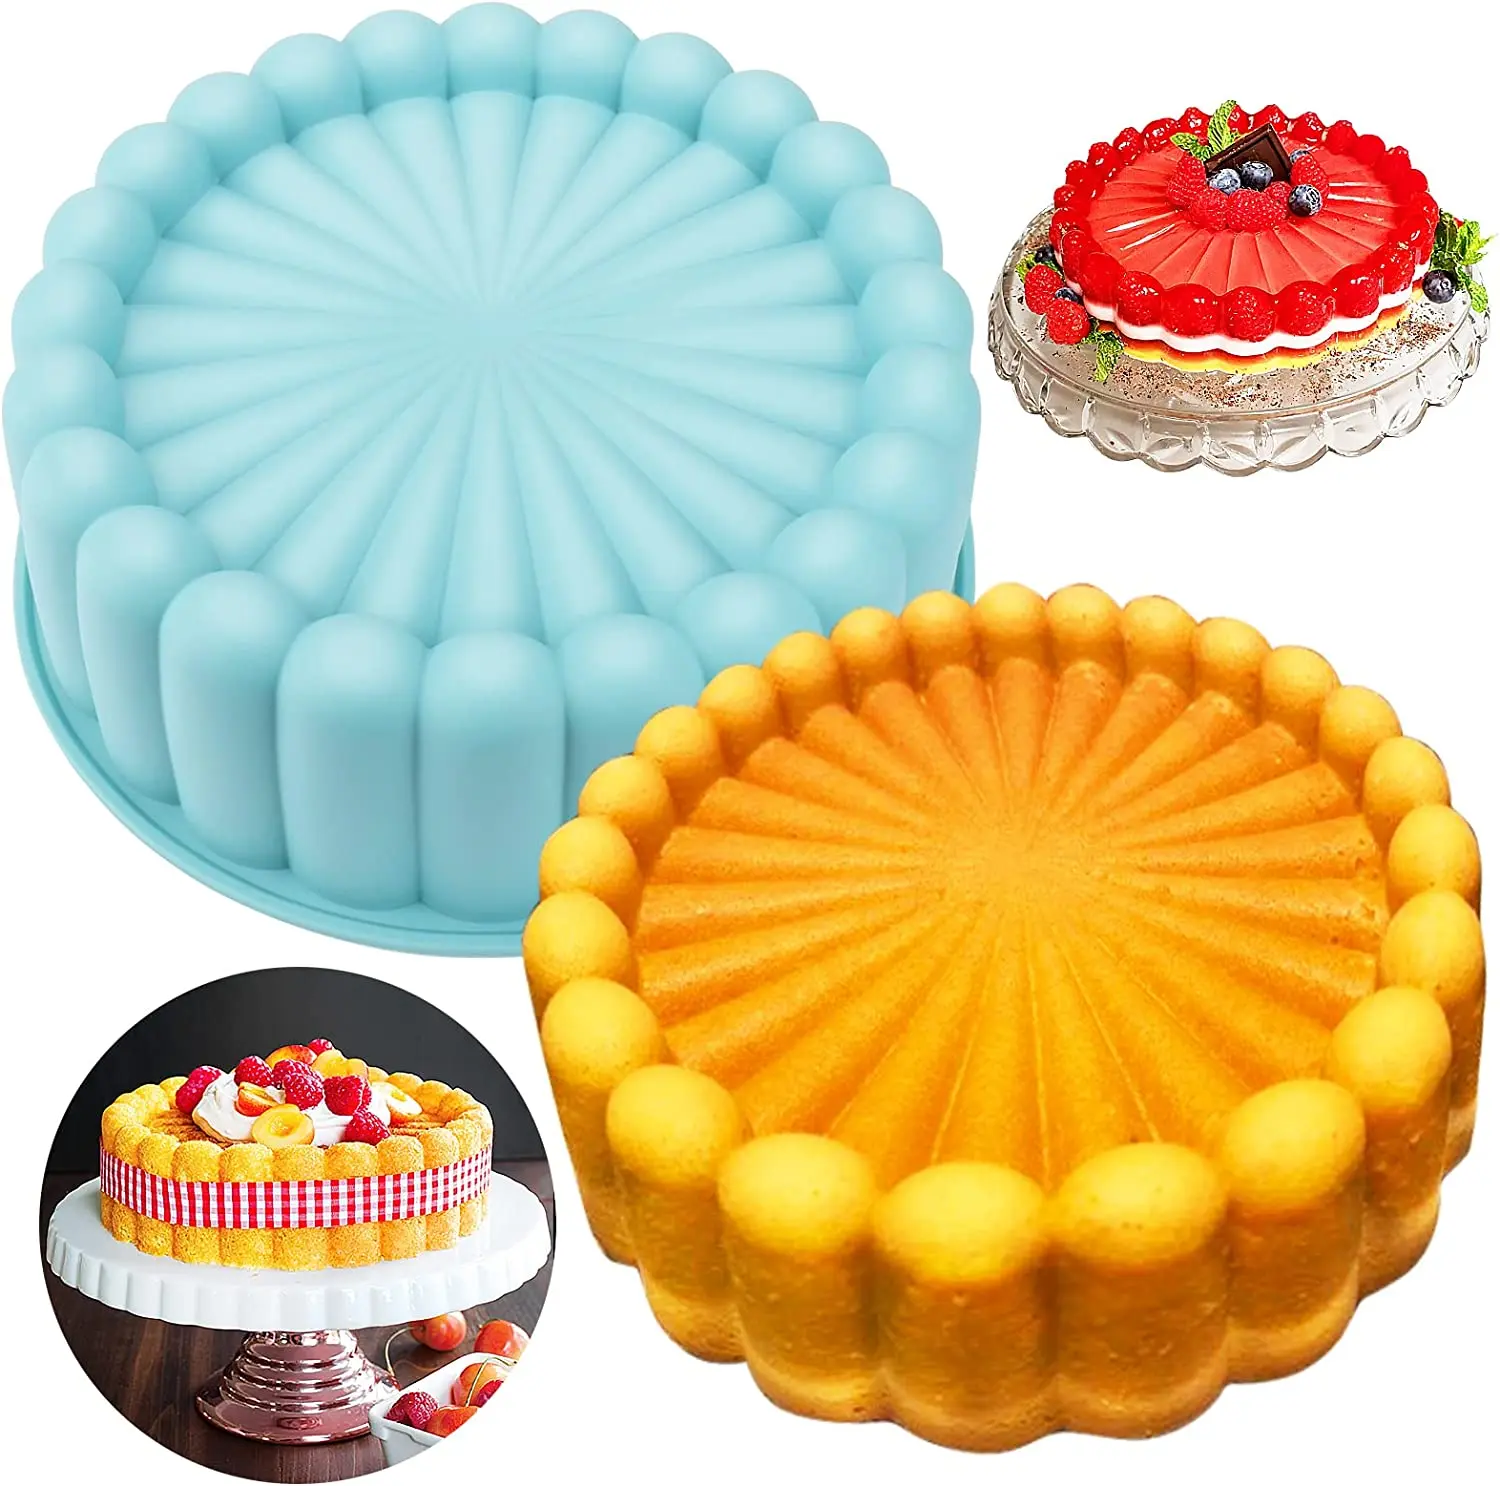 

Silicone Charlotte Cake Pan, 8 Inch Non-Stick Round Silicone Molds for Cheesecake, Chocolate Cake, Brownie, Tart